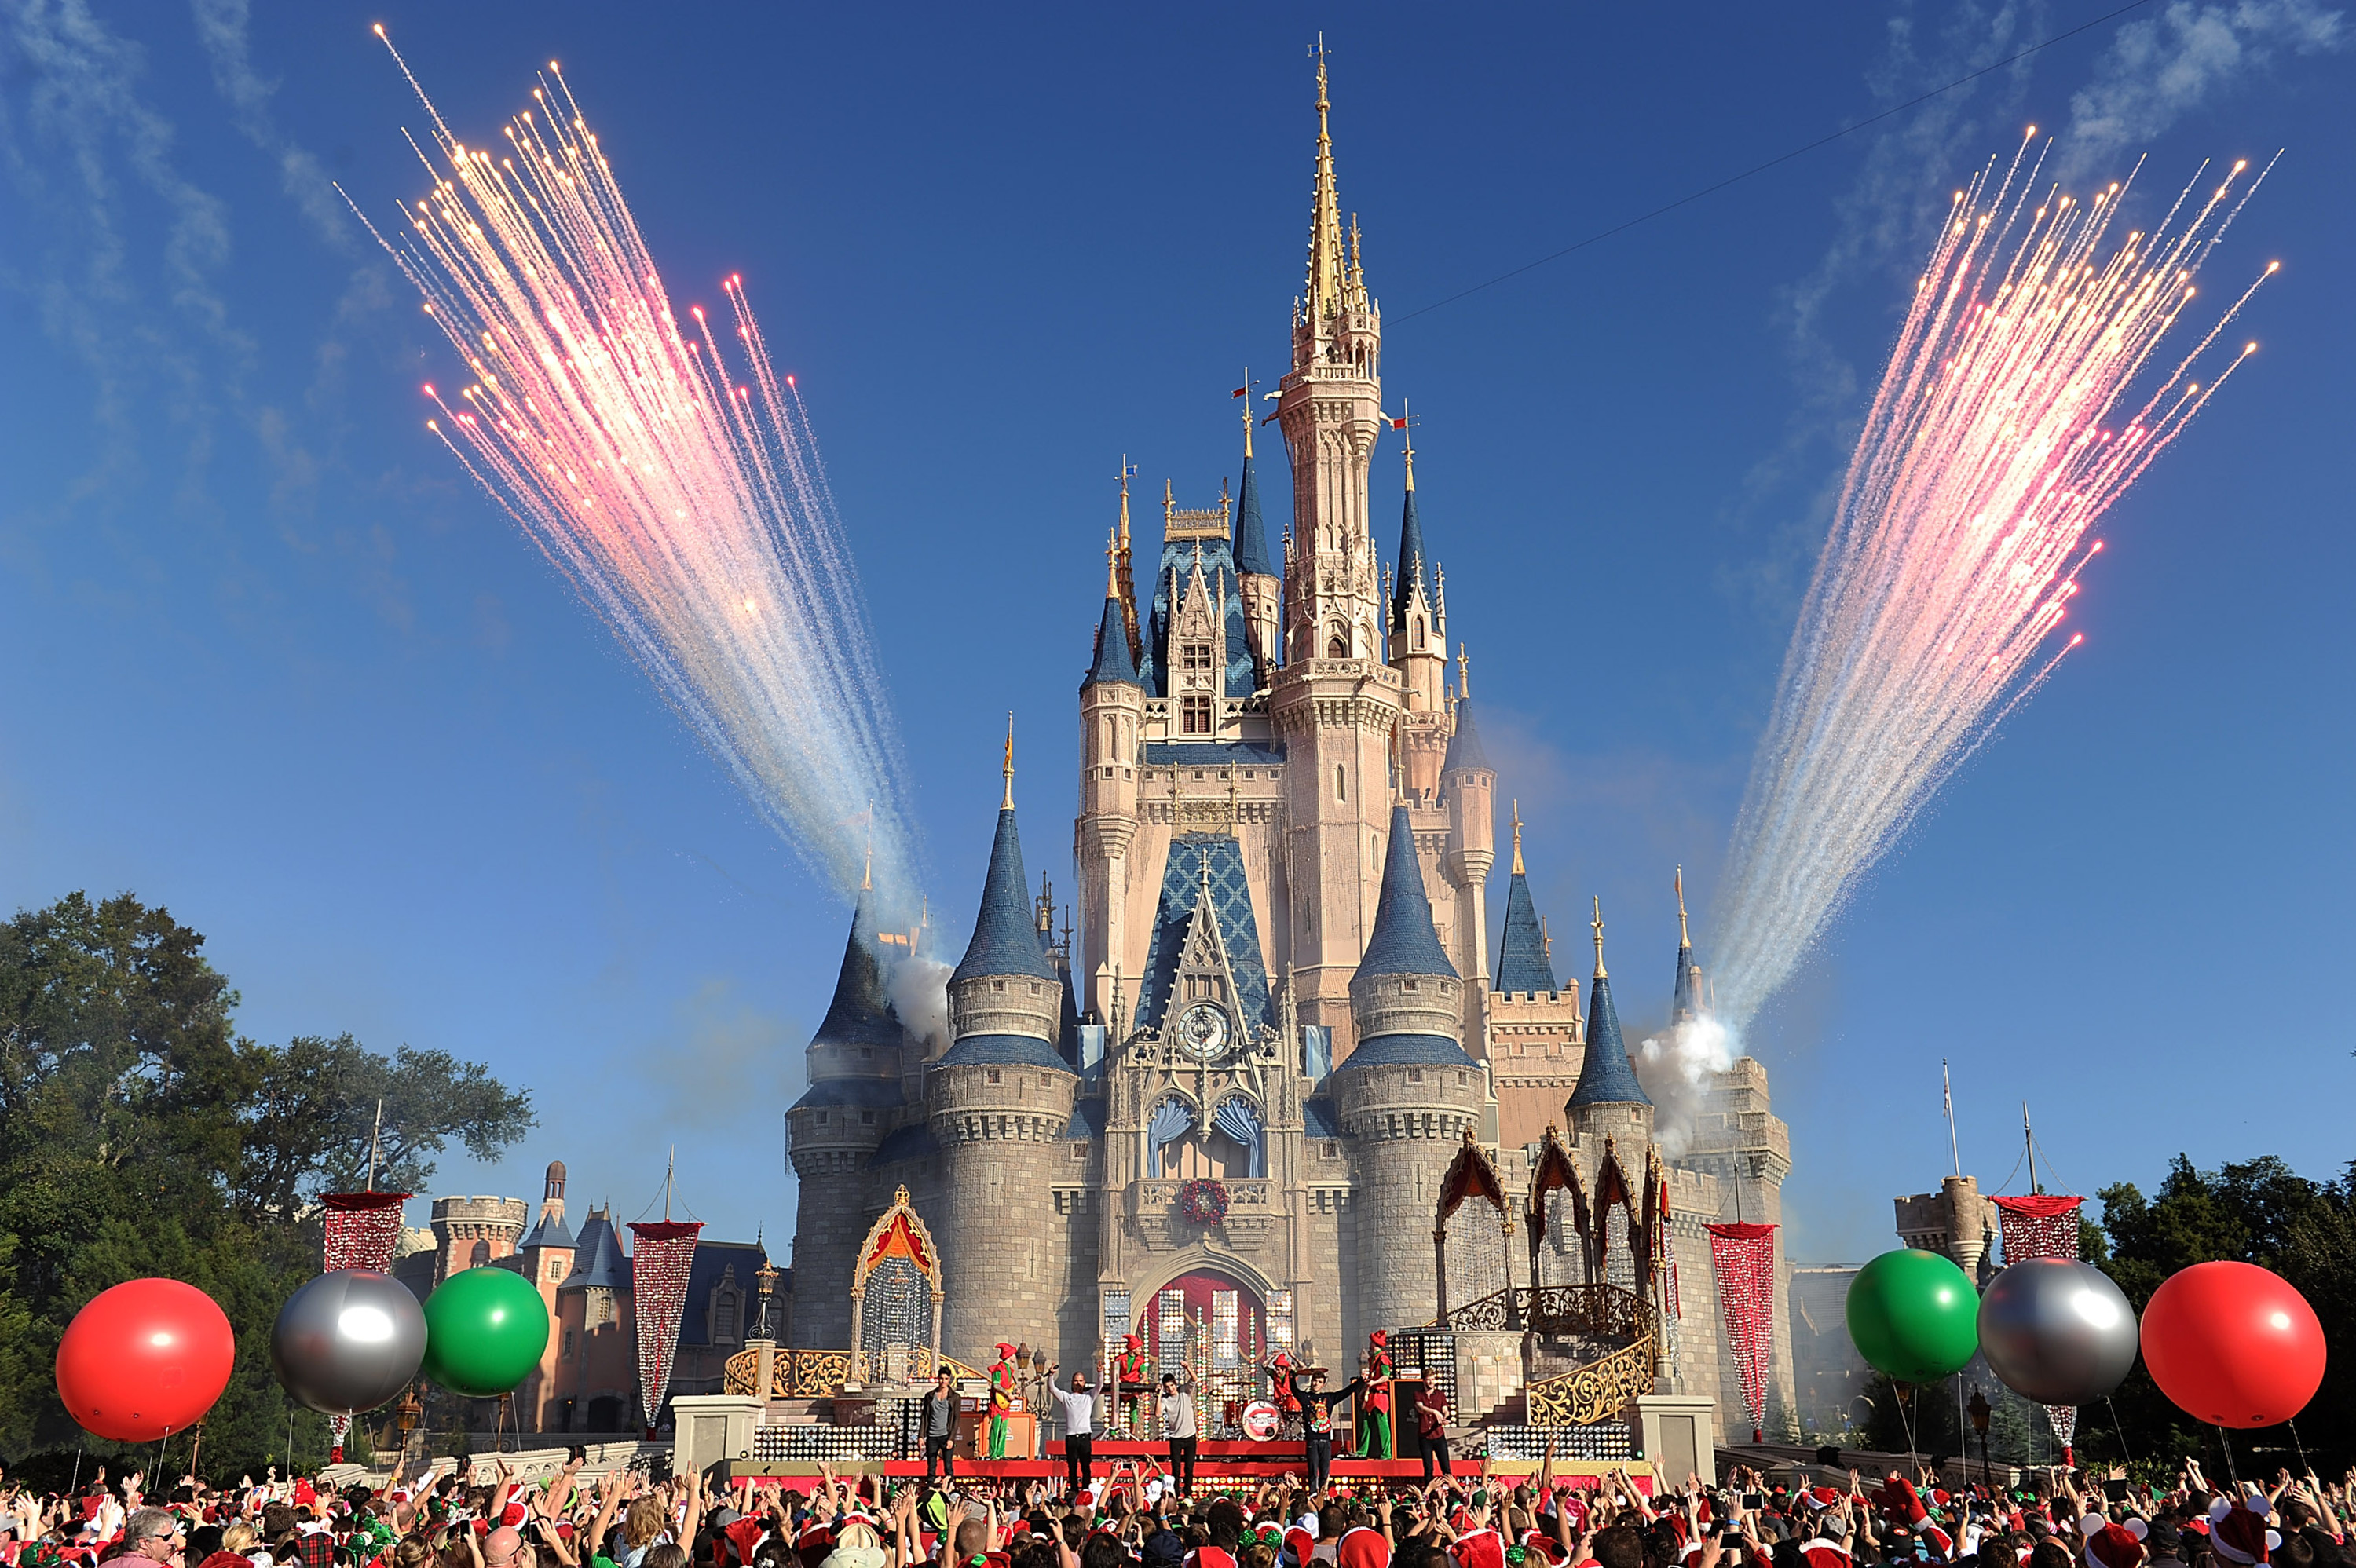 In this handout photo provided by Disney Parks, The Wanted performs while taping the Disney Parks Christmas Day Parade TV special on Dec. 6, 2013 at the Magic Kingdom park at Walt Disney World Resort in Lake Buena Vista, Fla. (Handout&mdash;Getty Images)